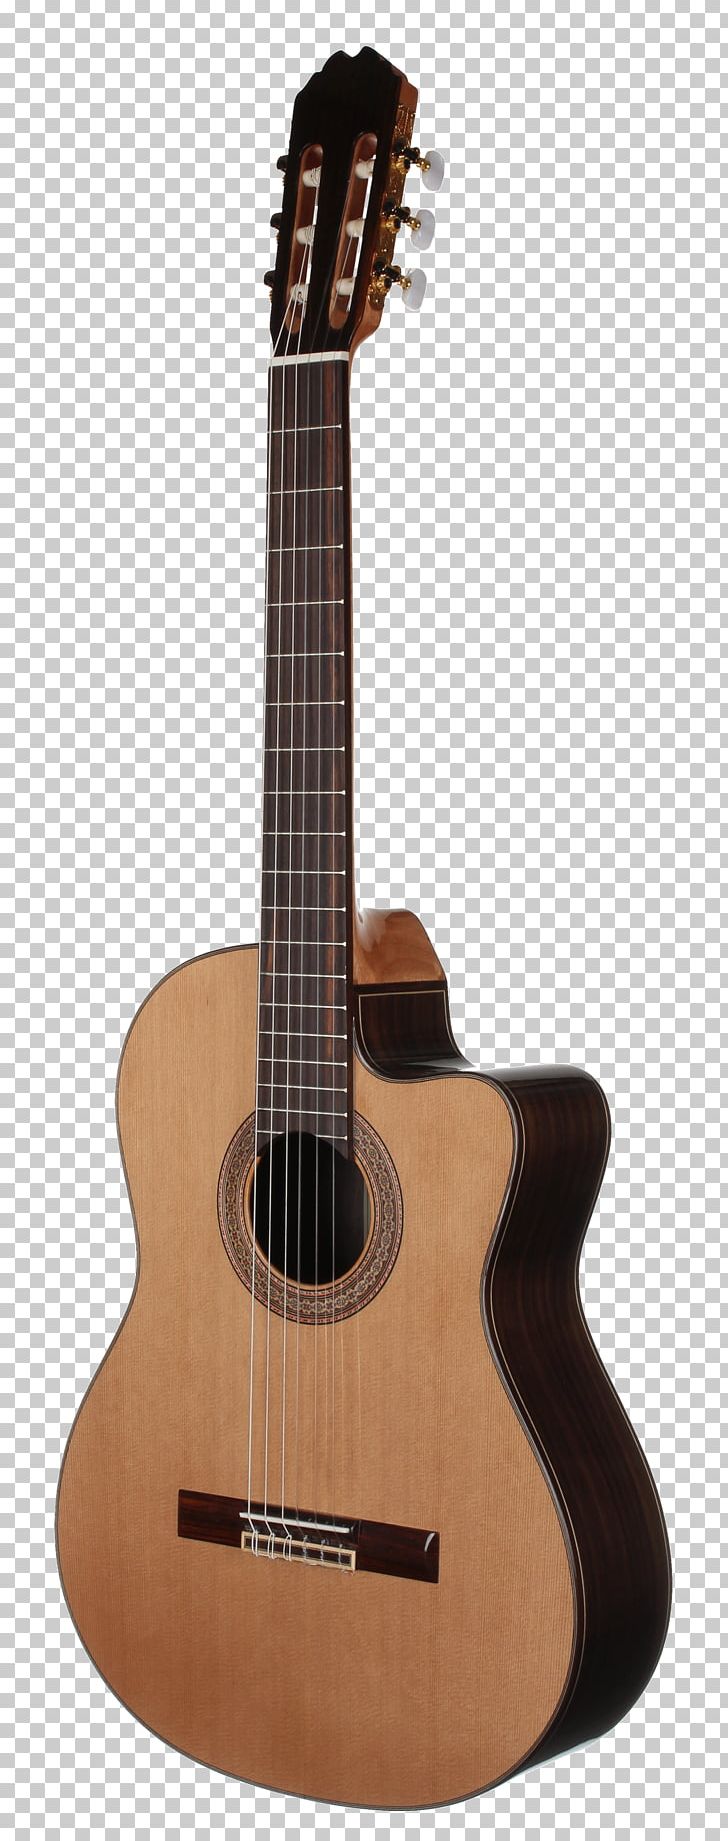 Taylor Guitars Classical Guitar Steel-string Acoustic Guitar Musical Instruments PNG, Clipart, Acoustic Electric Guitar, Bridge, Classical Guitar, Cuatro, Guitar Accessory Free PNG Download